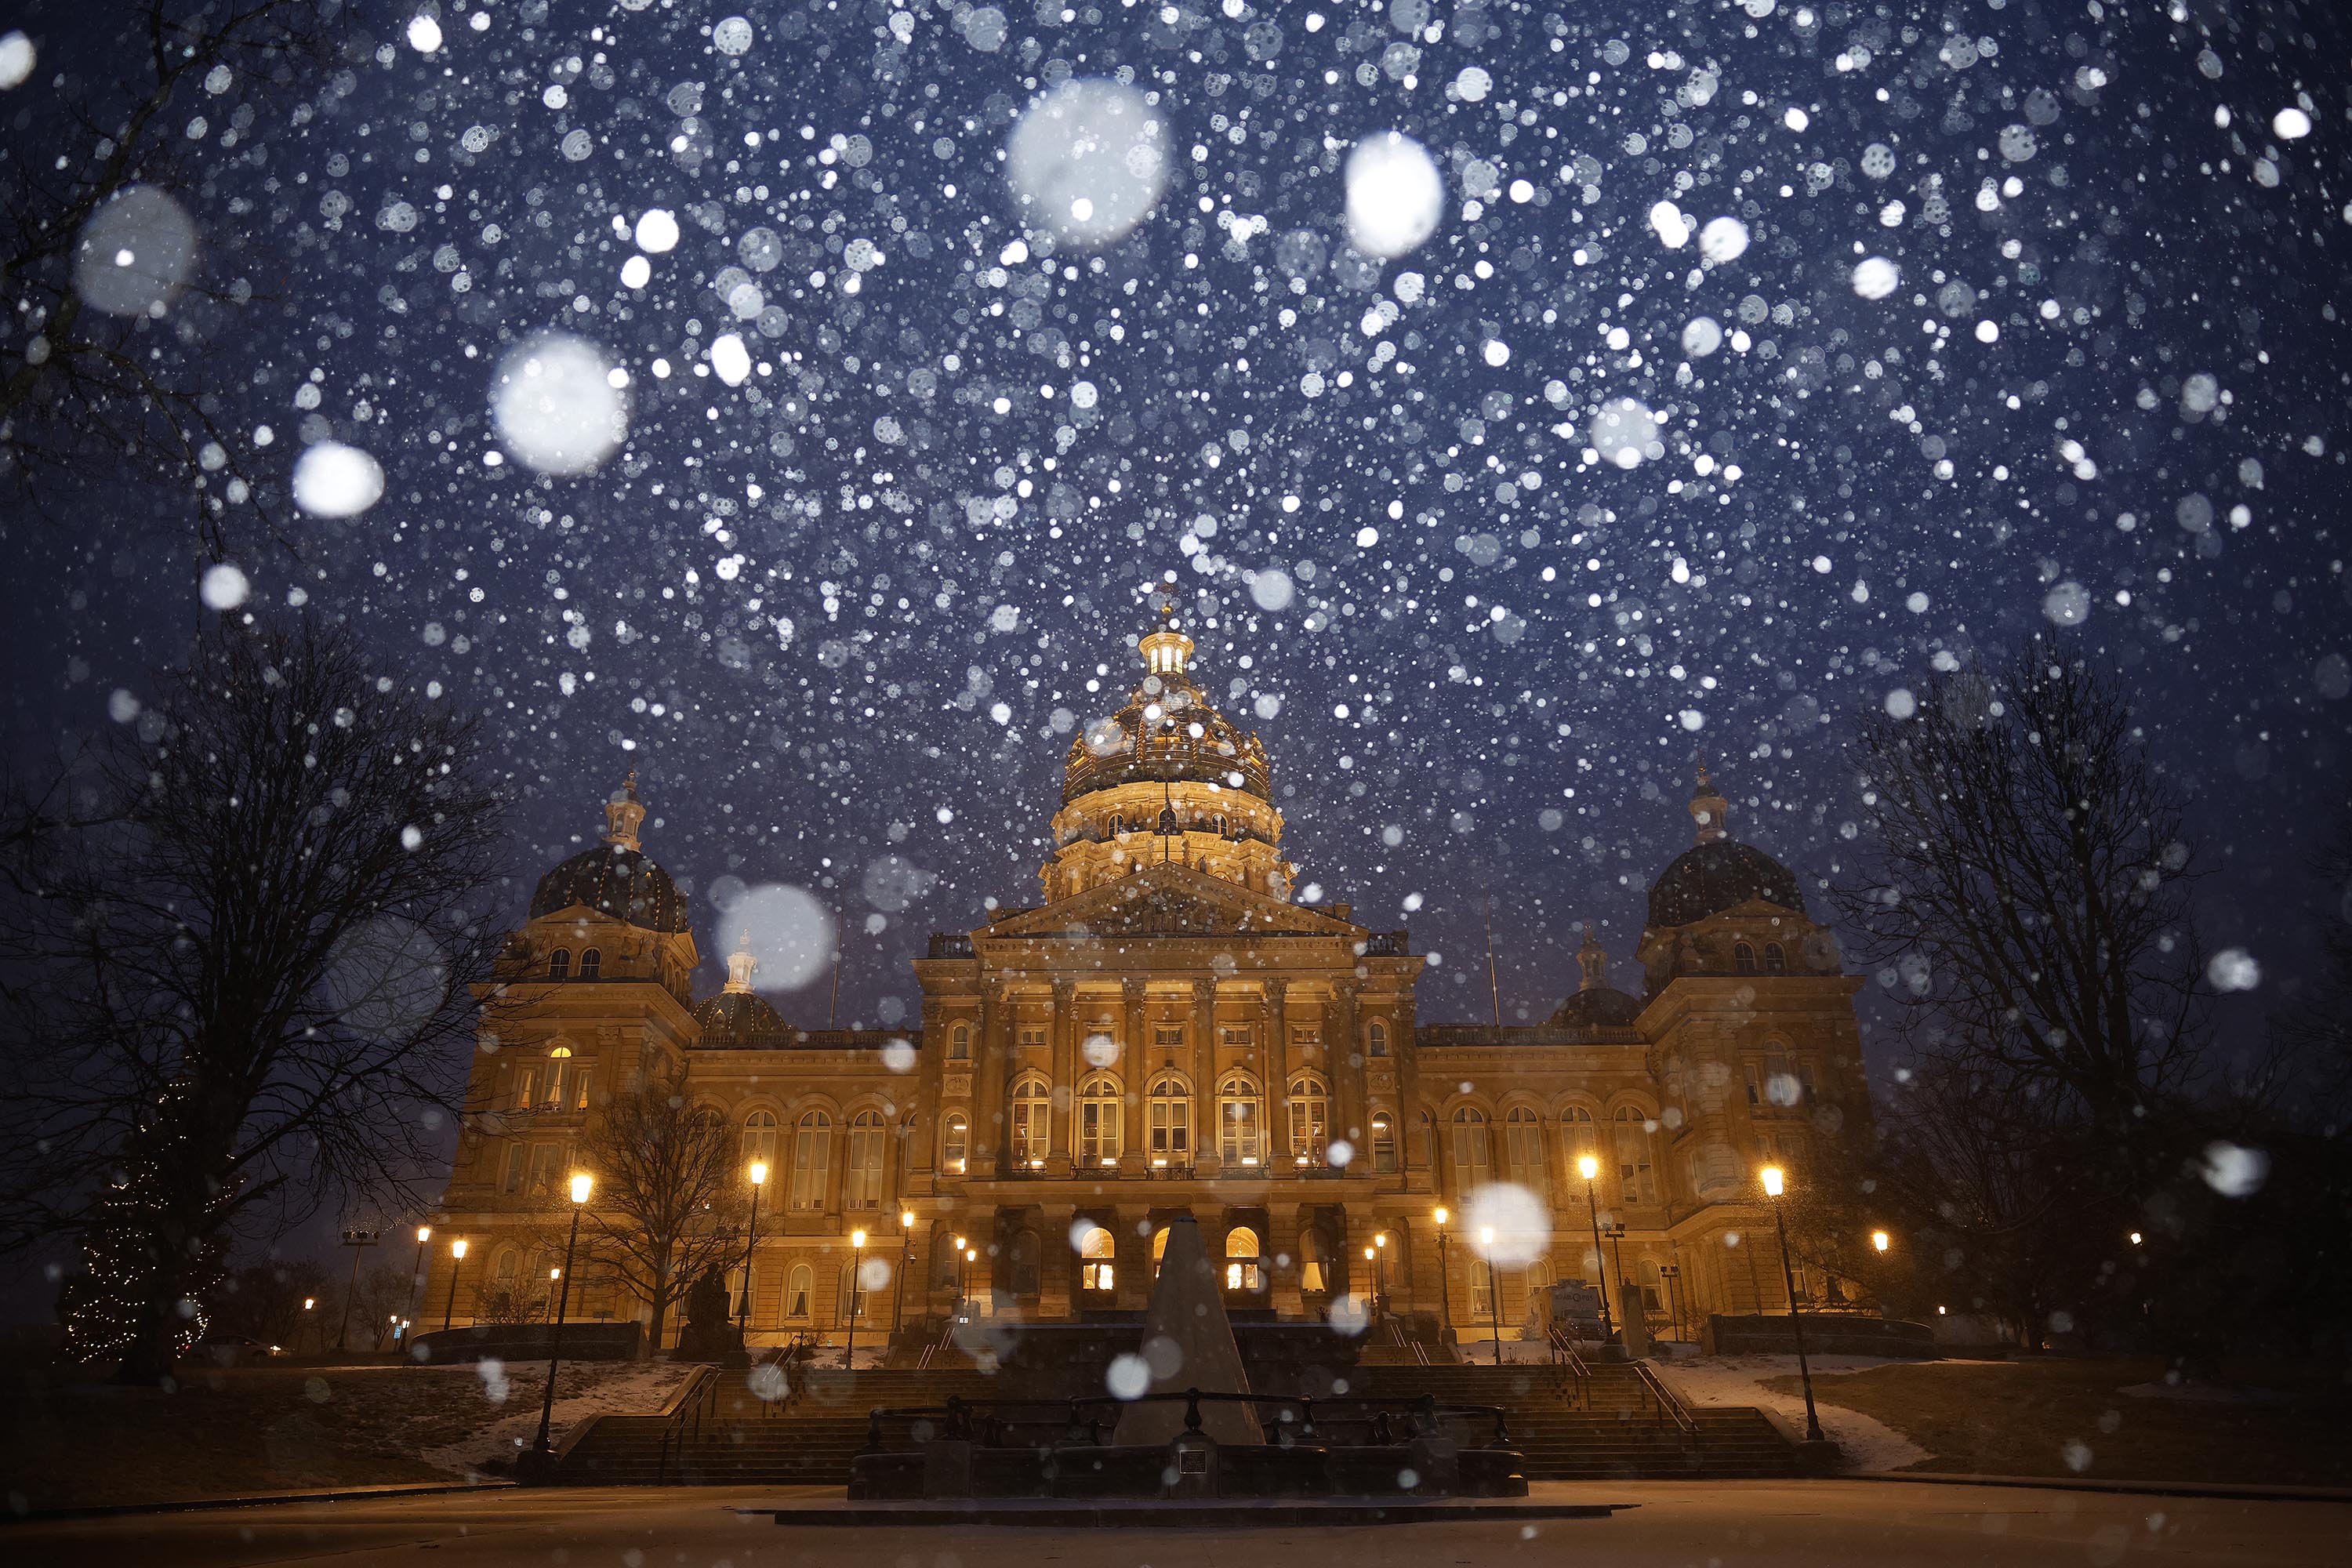 Snow falls on the Iowa State Capitol in Des Moines, Iowa, on January 8.